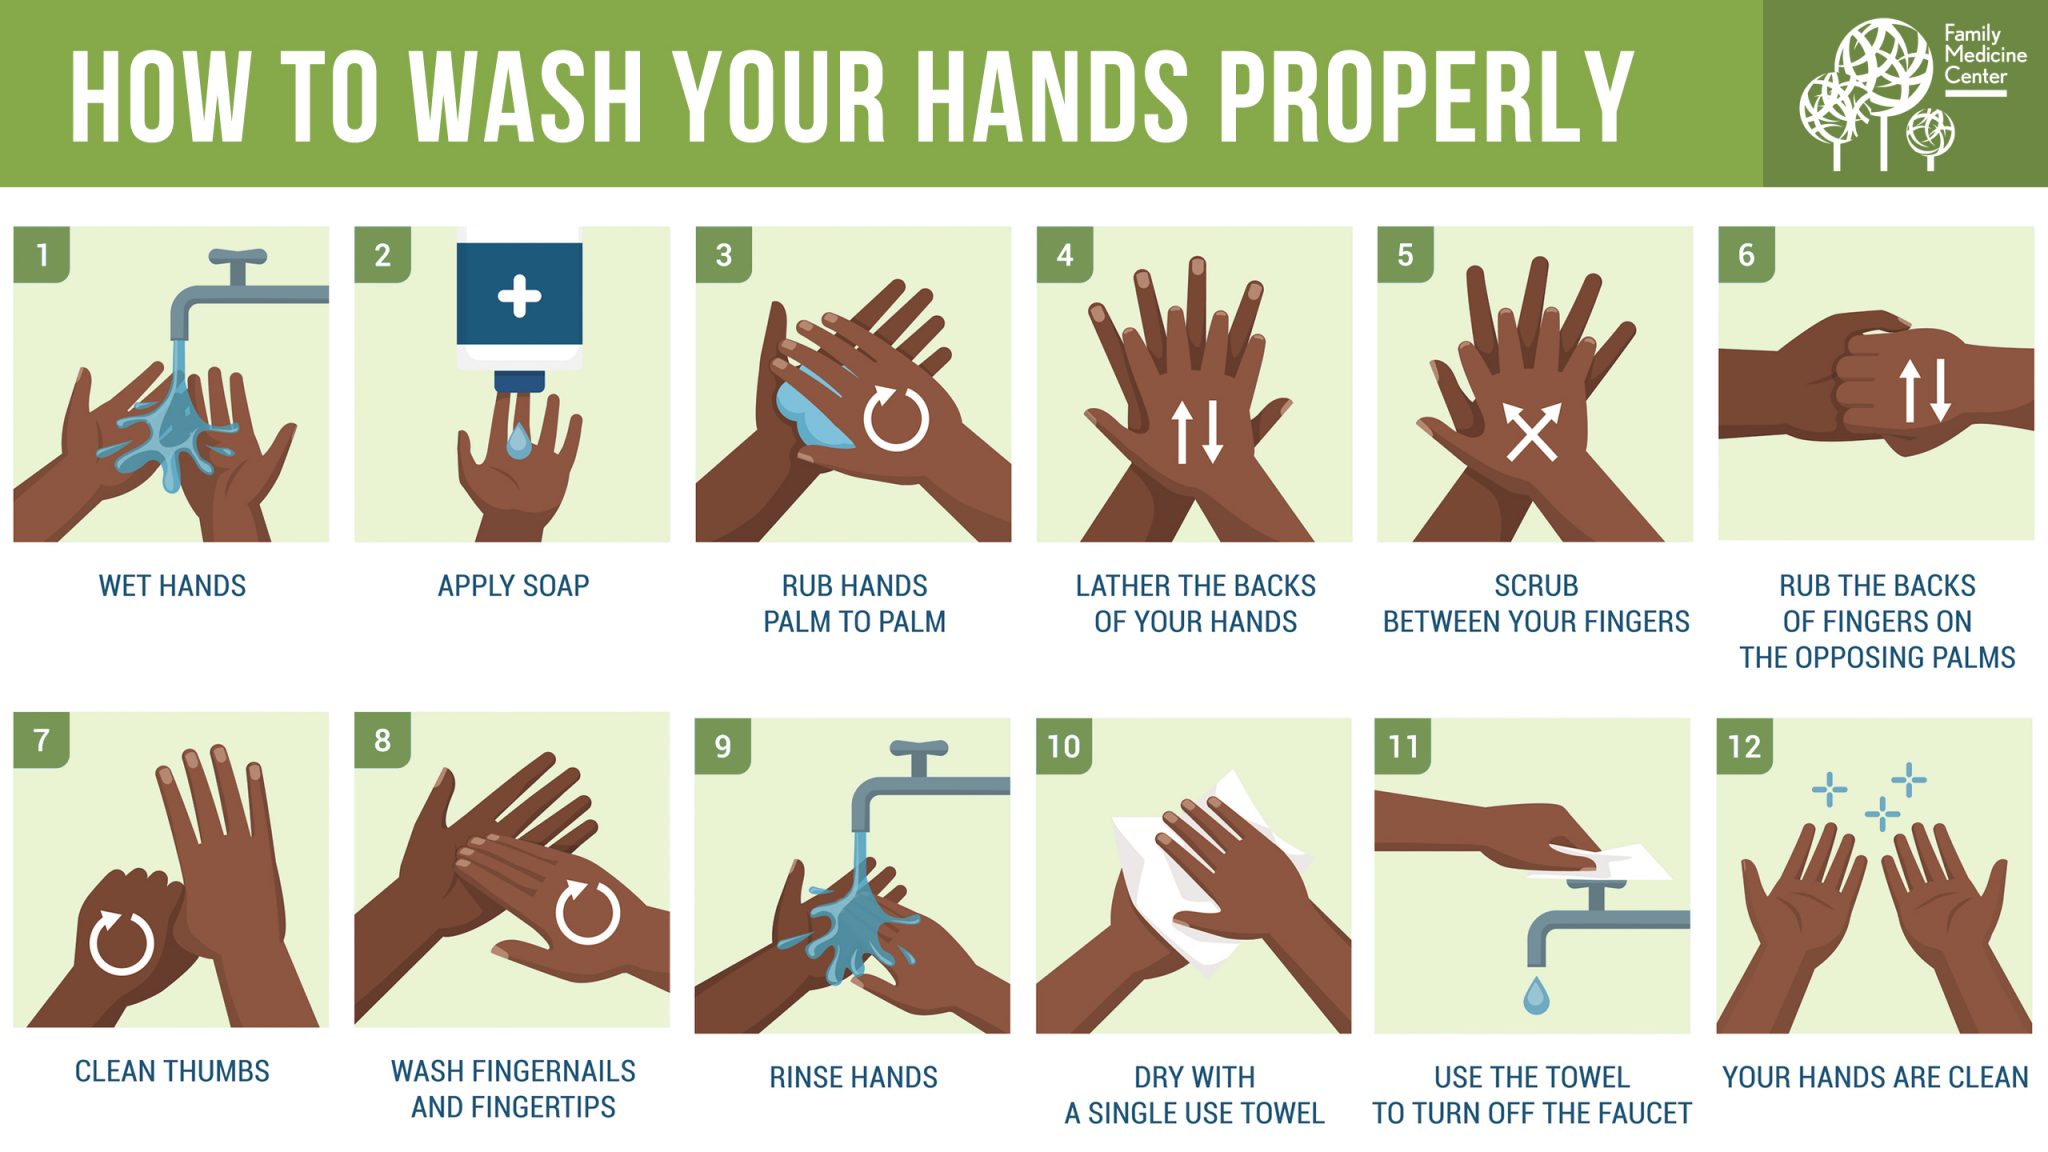 should you wash your hands in the kitchen sink